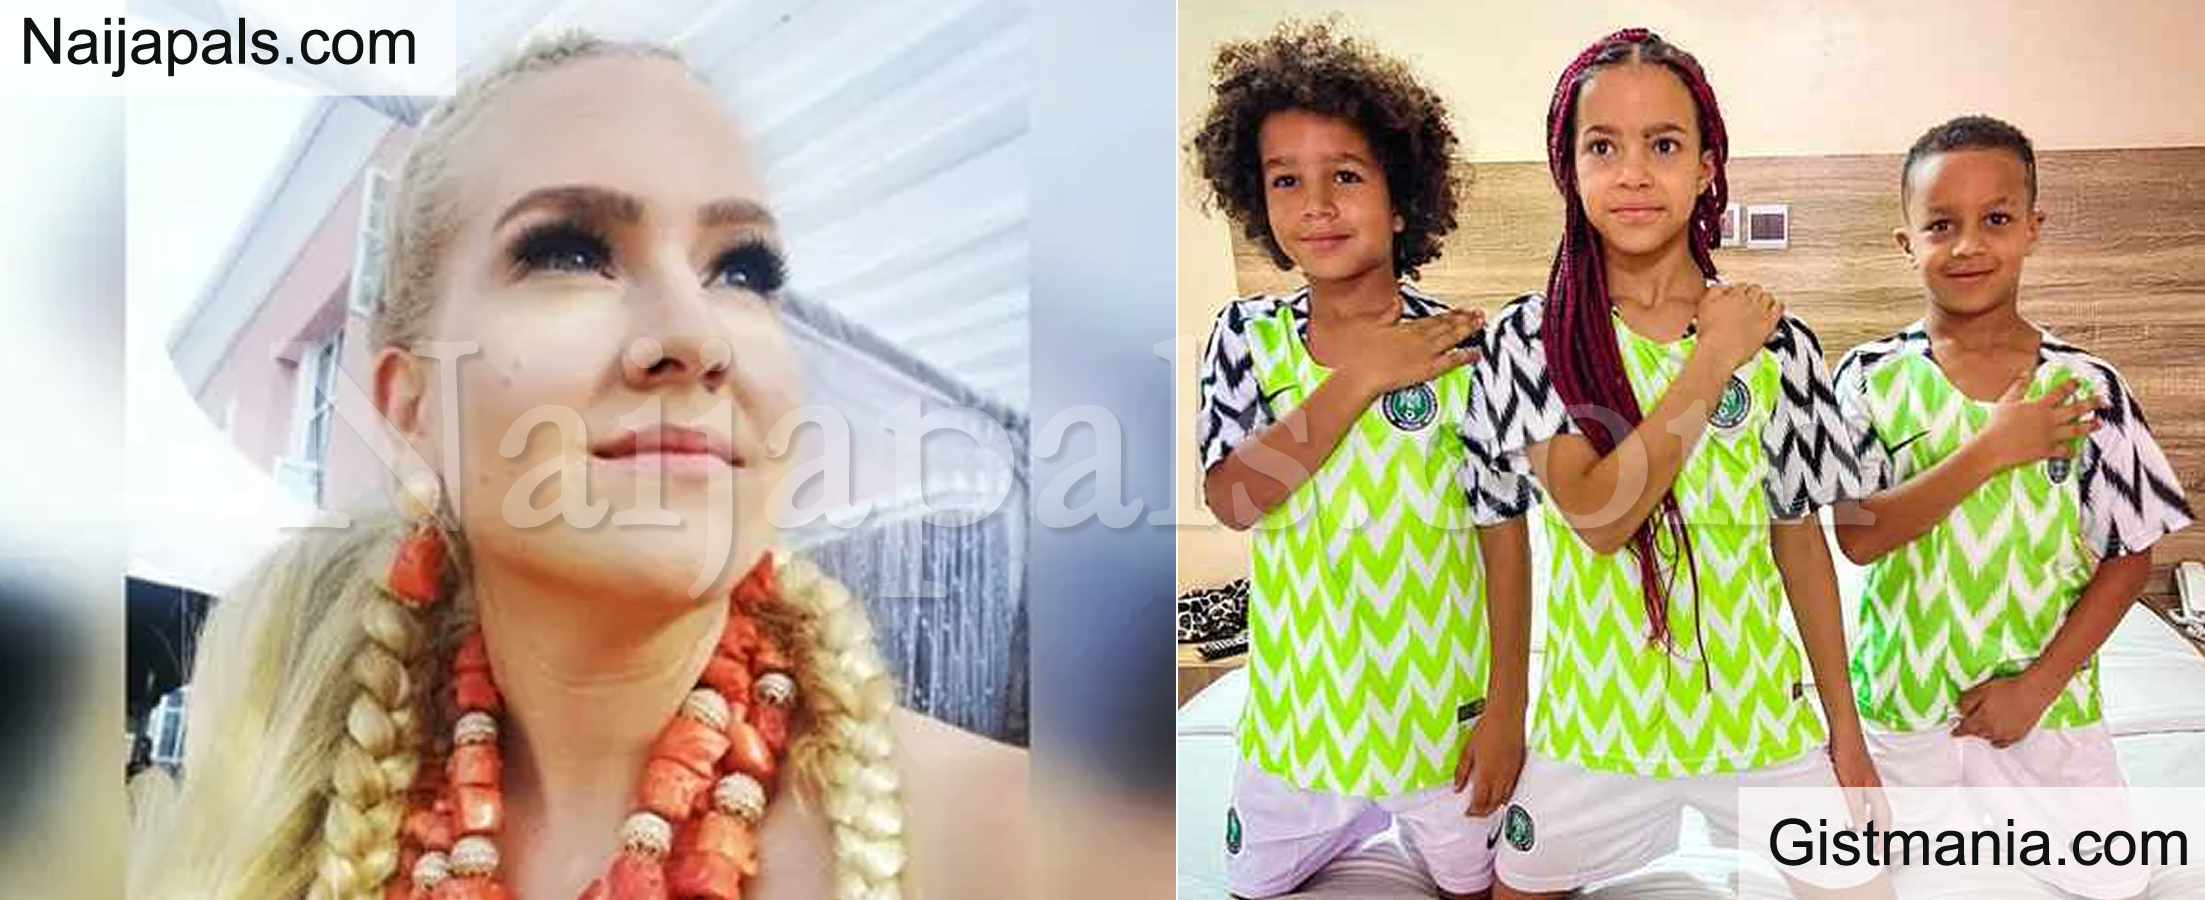 <img alt='.' class='lazyload' data-src='https://img.gistmania.com/emot/photo.png' /> <b>Nwanyi Ocha Slams Trolls With Photos Of Her Children After “Commissioner For Tourism" Row In Anambra</b>